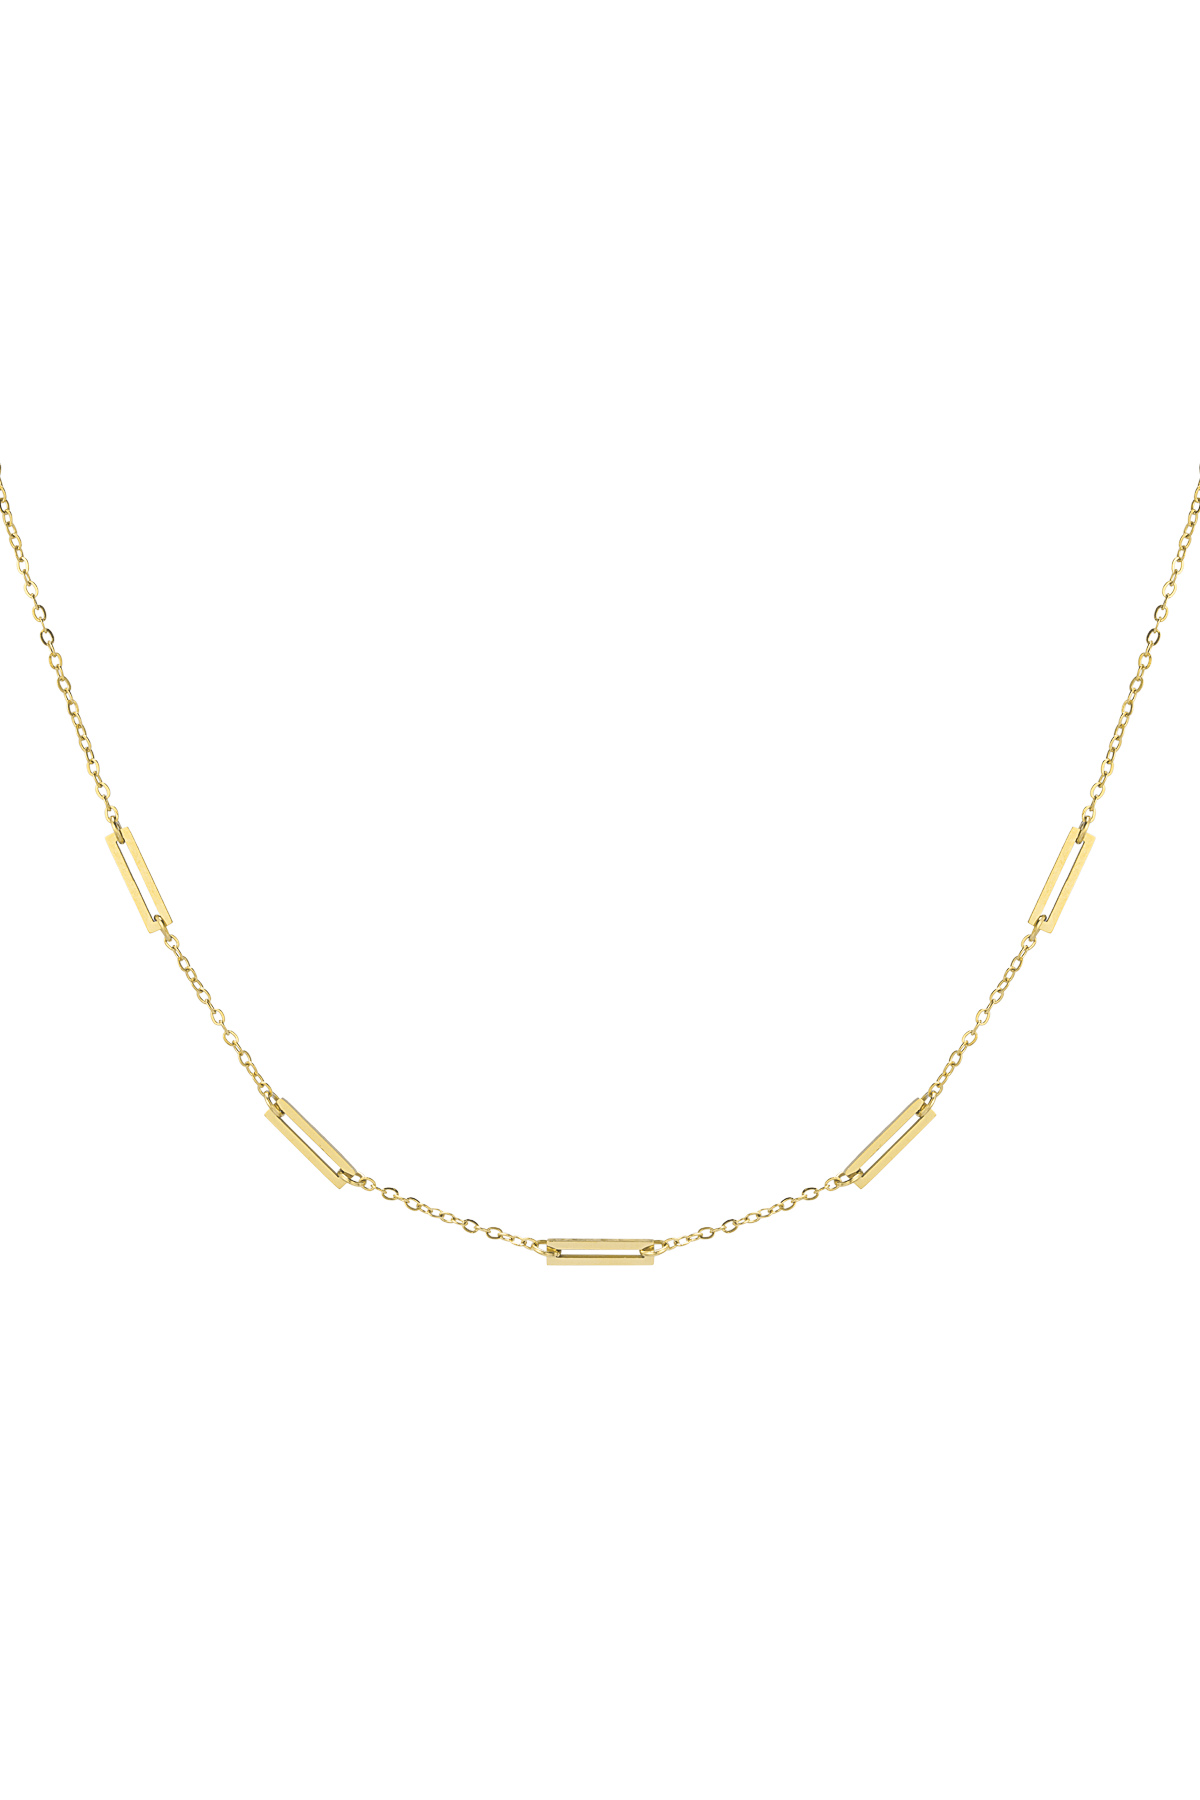 Necklace 5 links - gold 